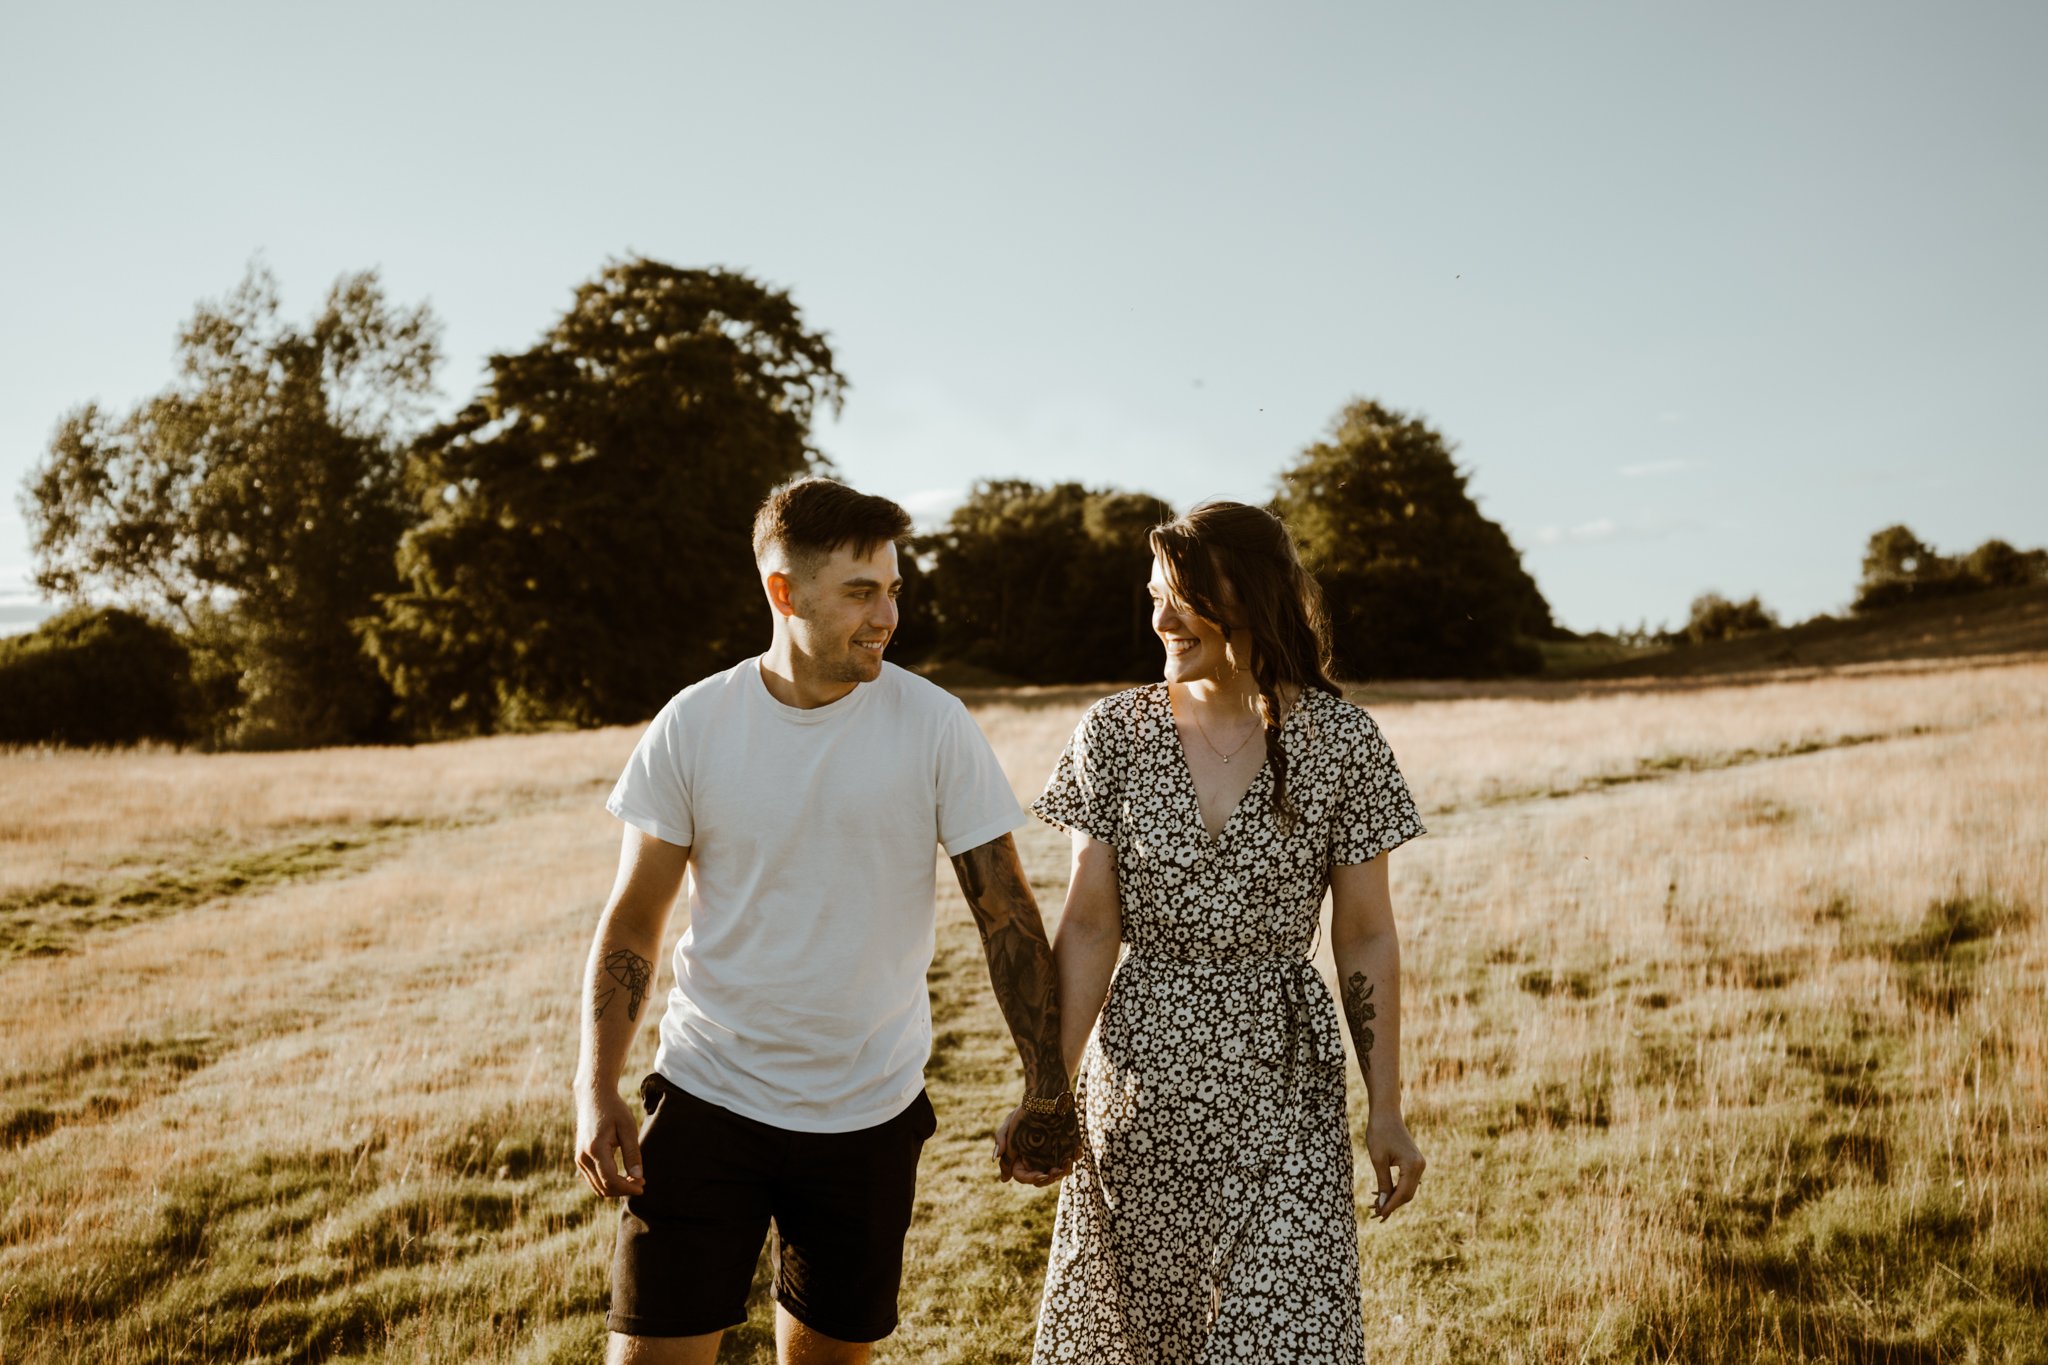 Angus Scotland Engagement and Wedding Photographer - Emily and Gabriel - Adventure Couple Session4.jpg